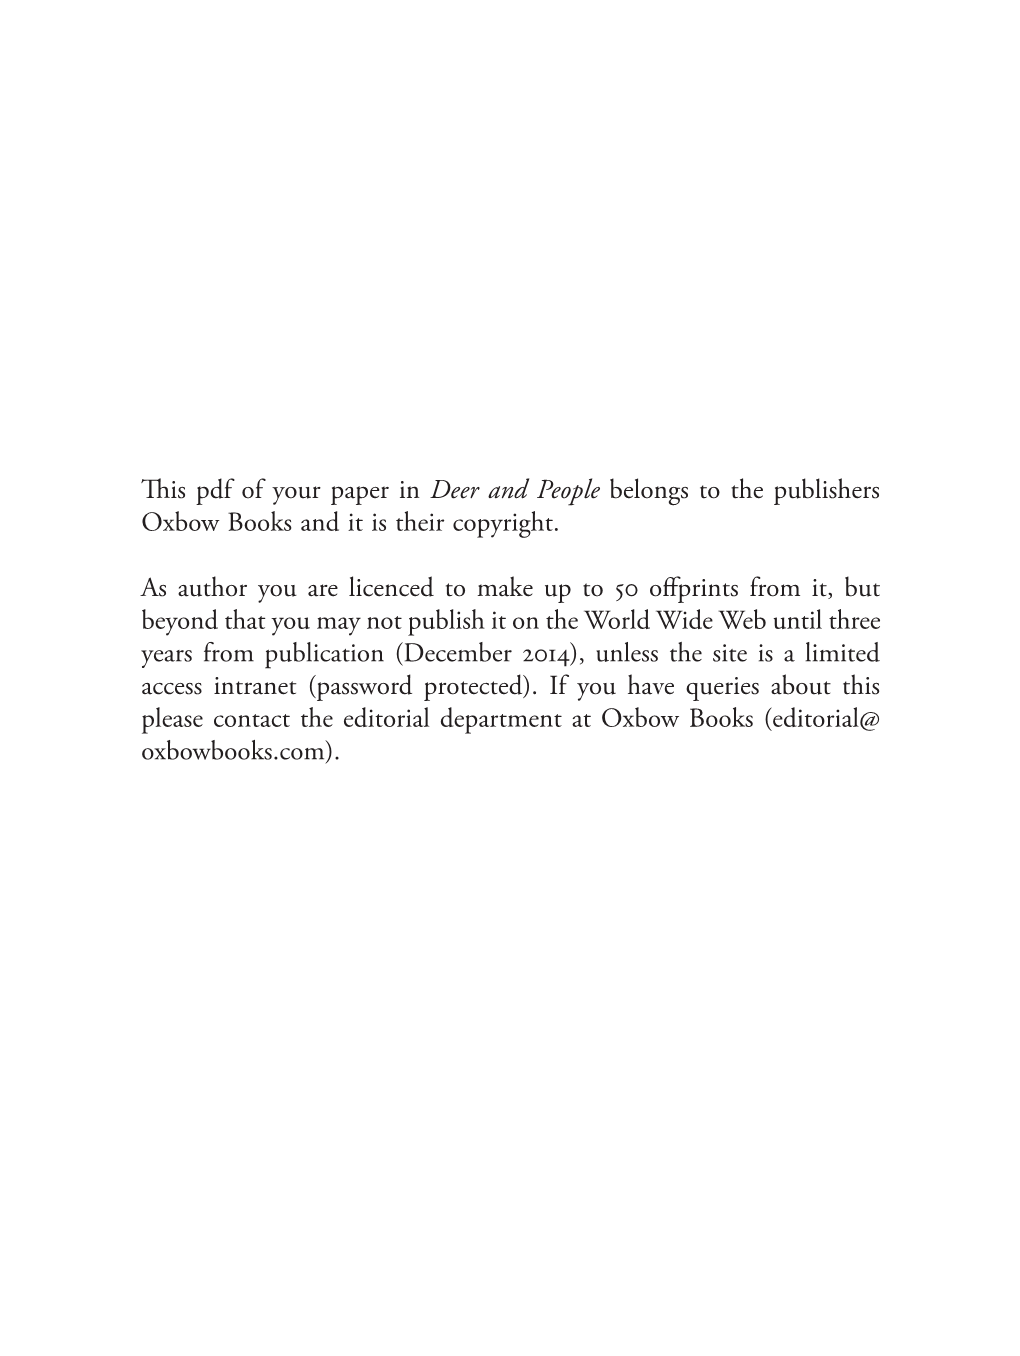 This Pdf of Your Paper in Deer and People Belongs to the Publishers Oxbow Books and It Is Their Copyright